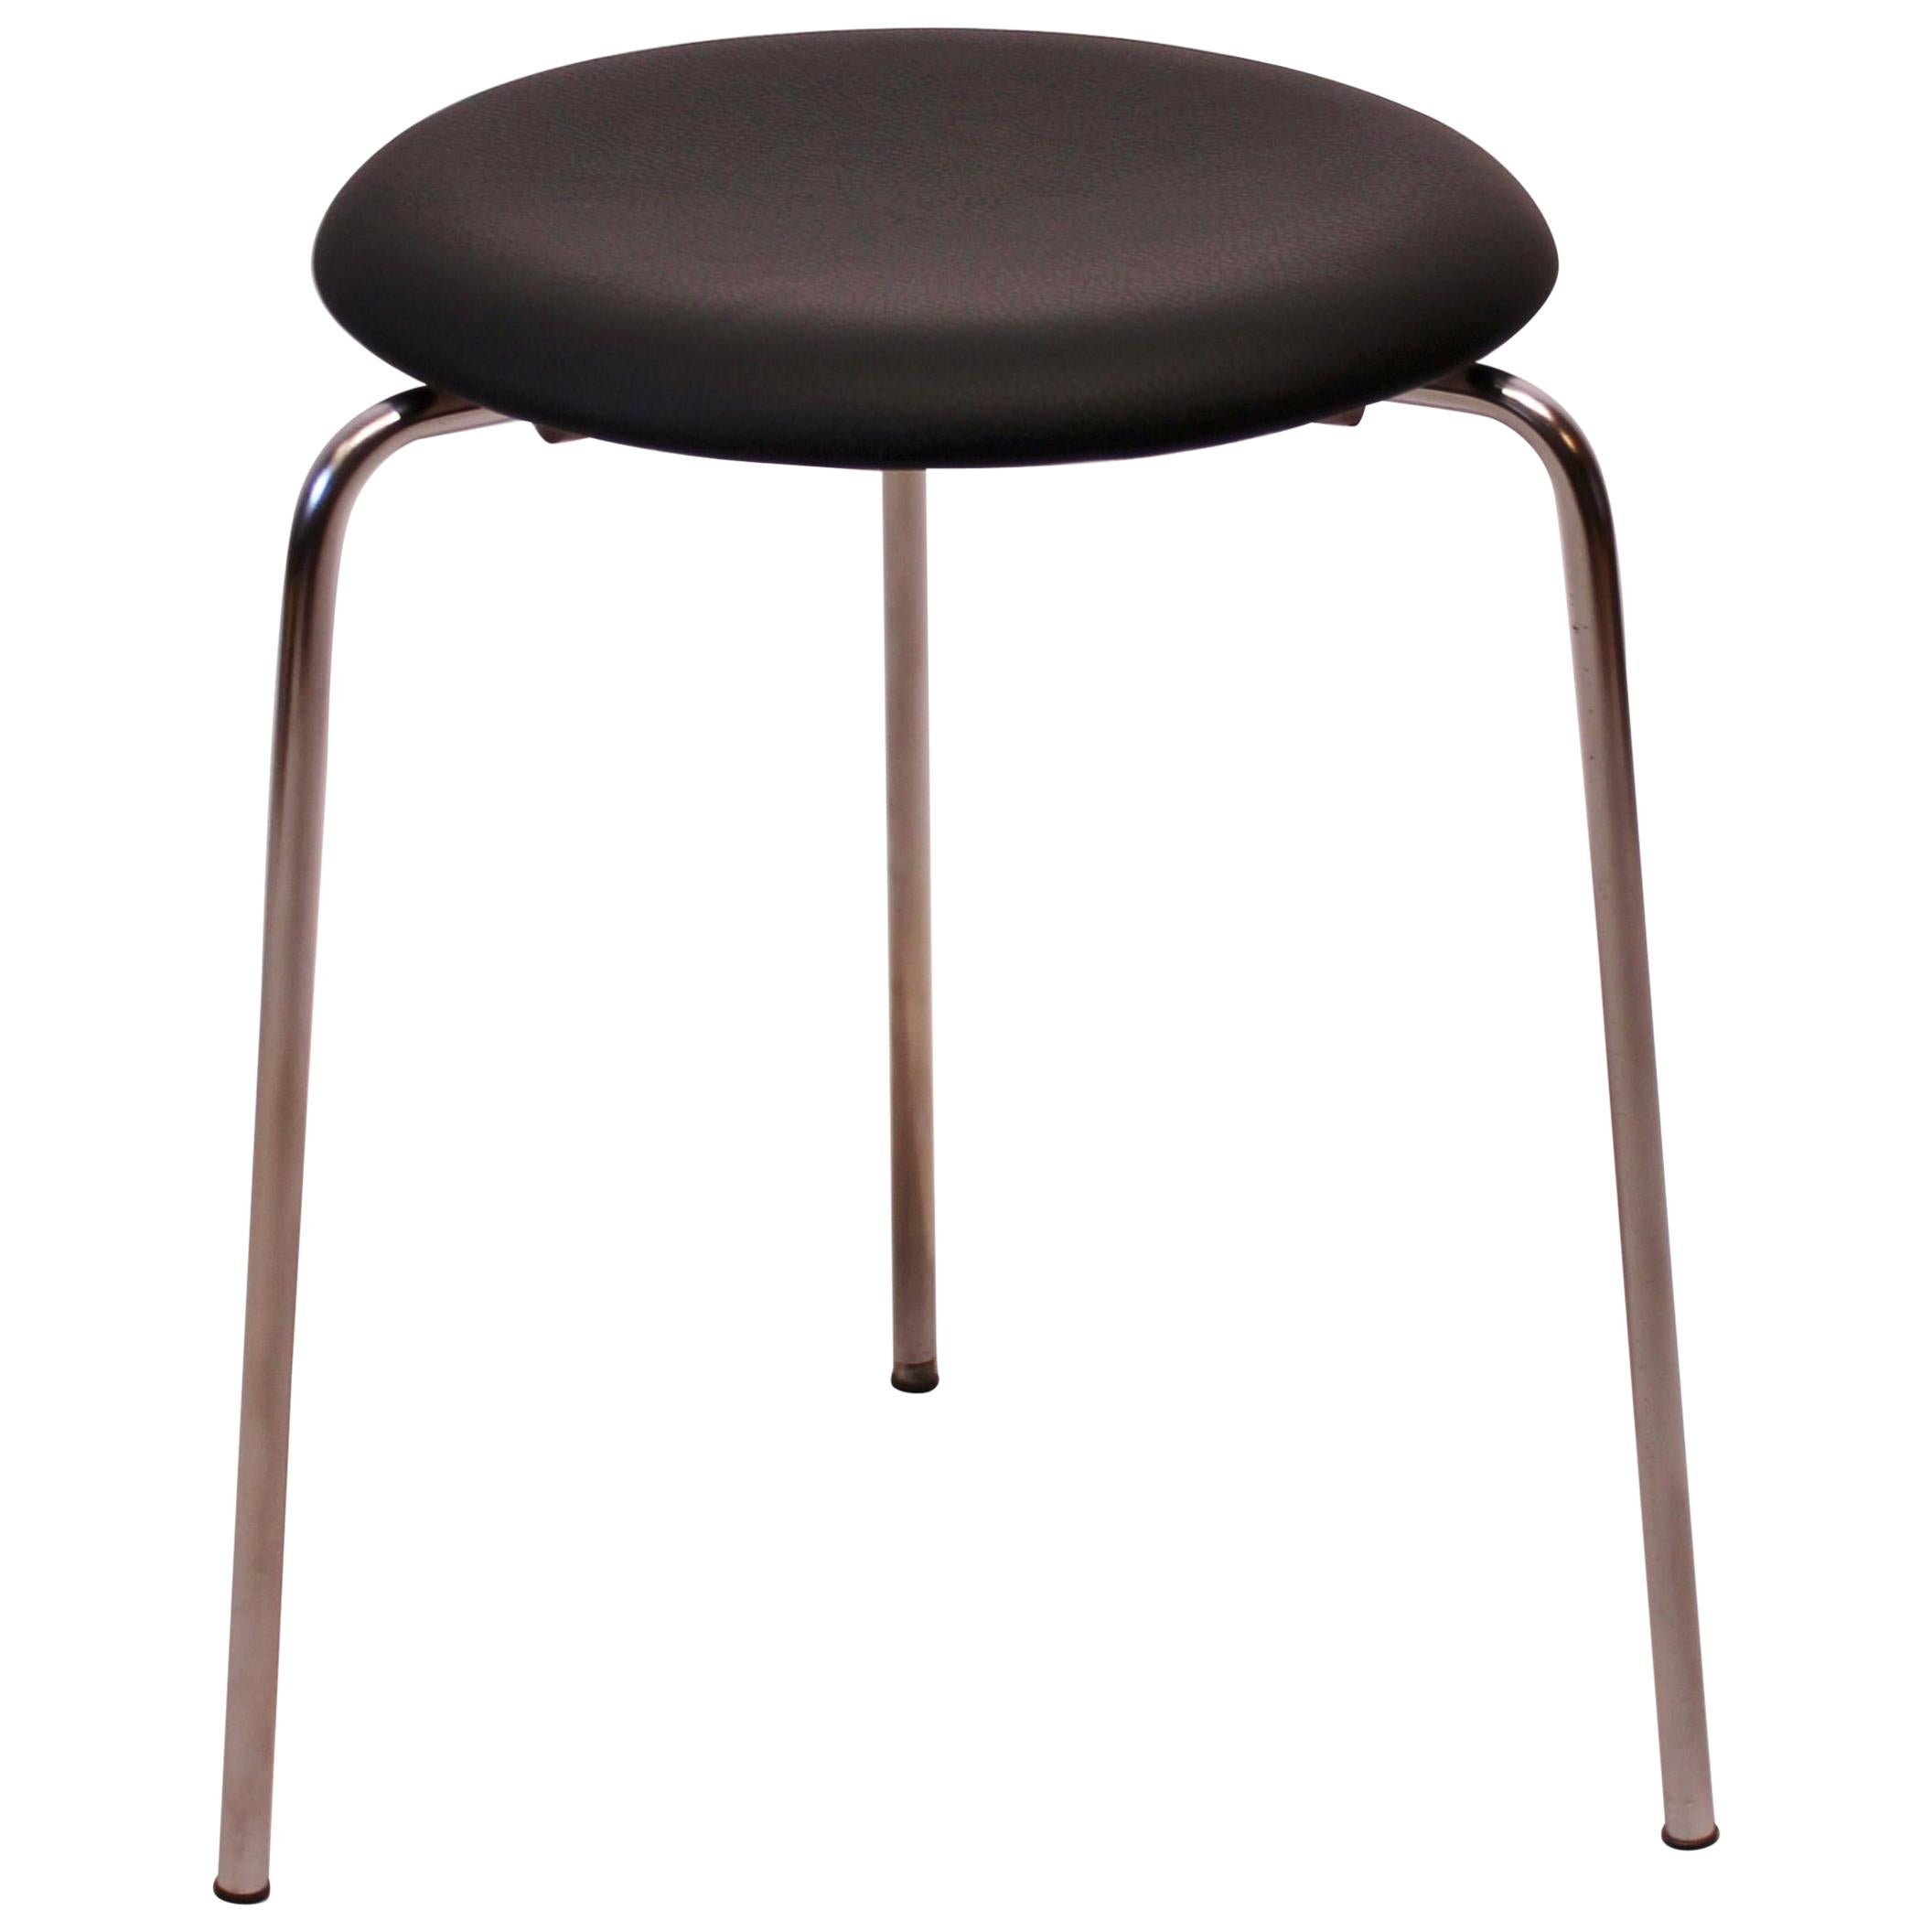 Dot Stool with Black Leather Designed by Arne Jacobsen, 1971